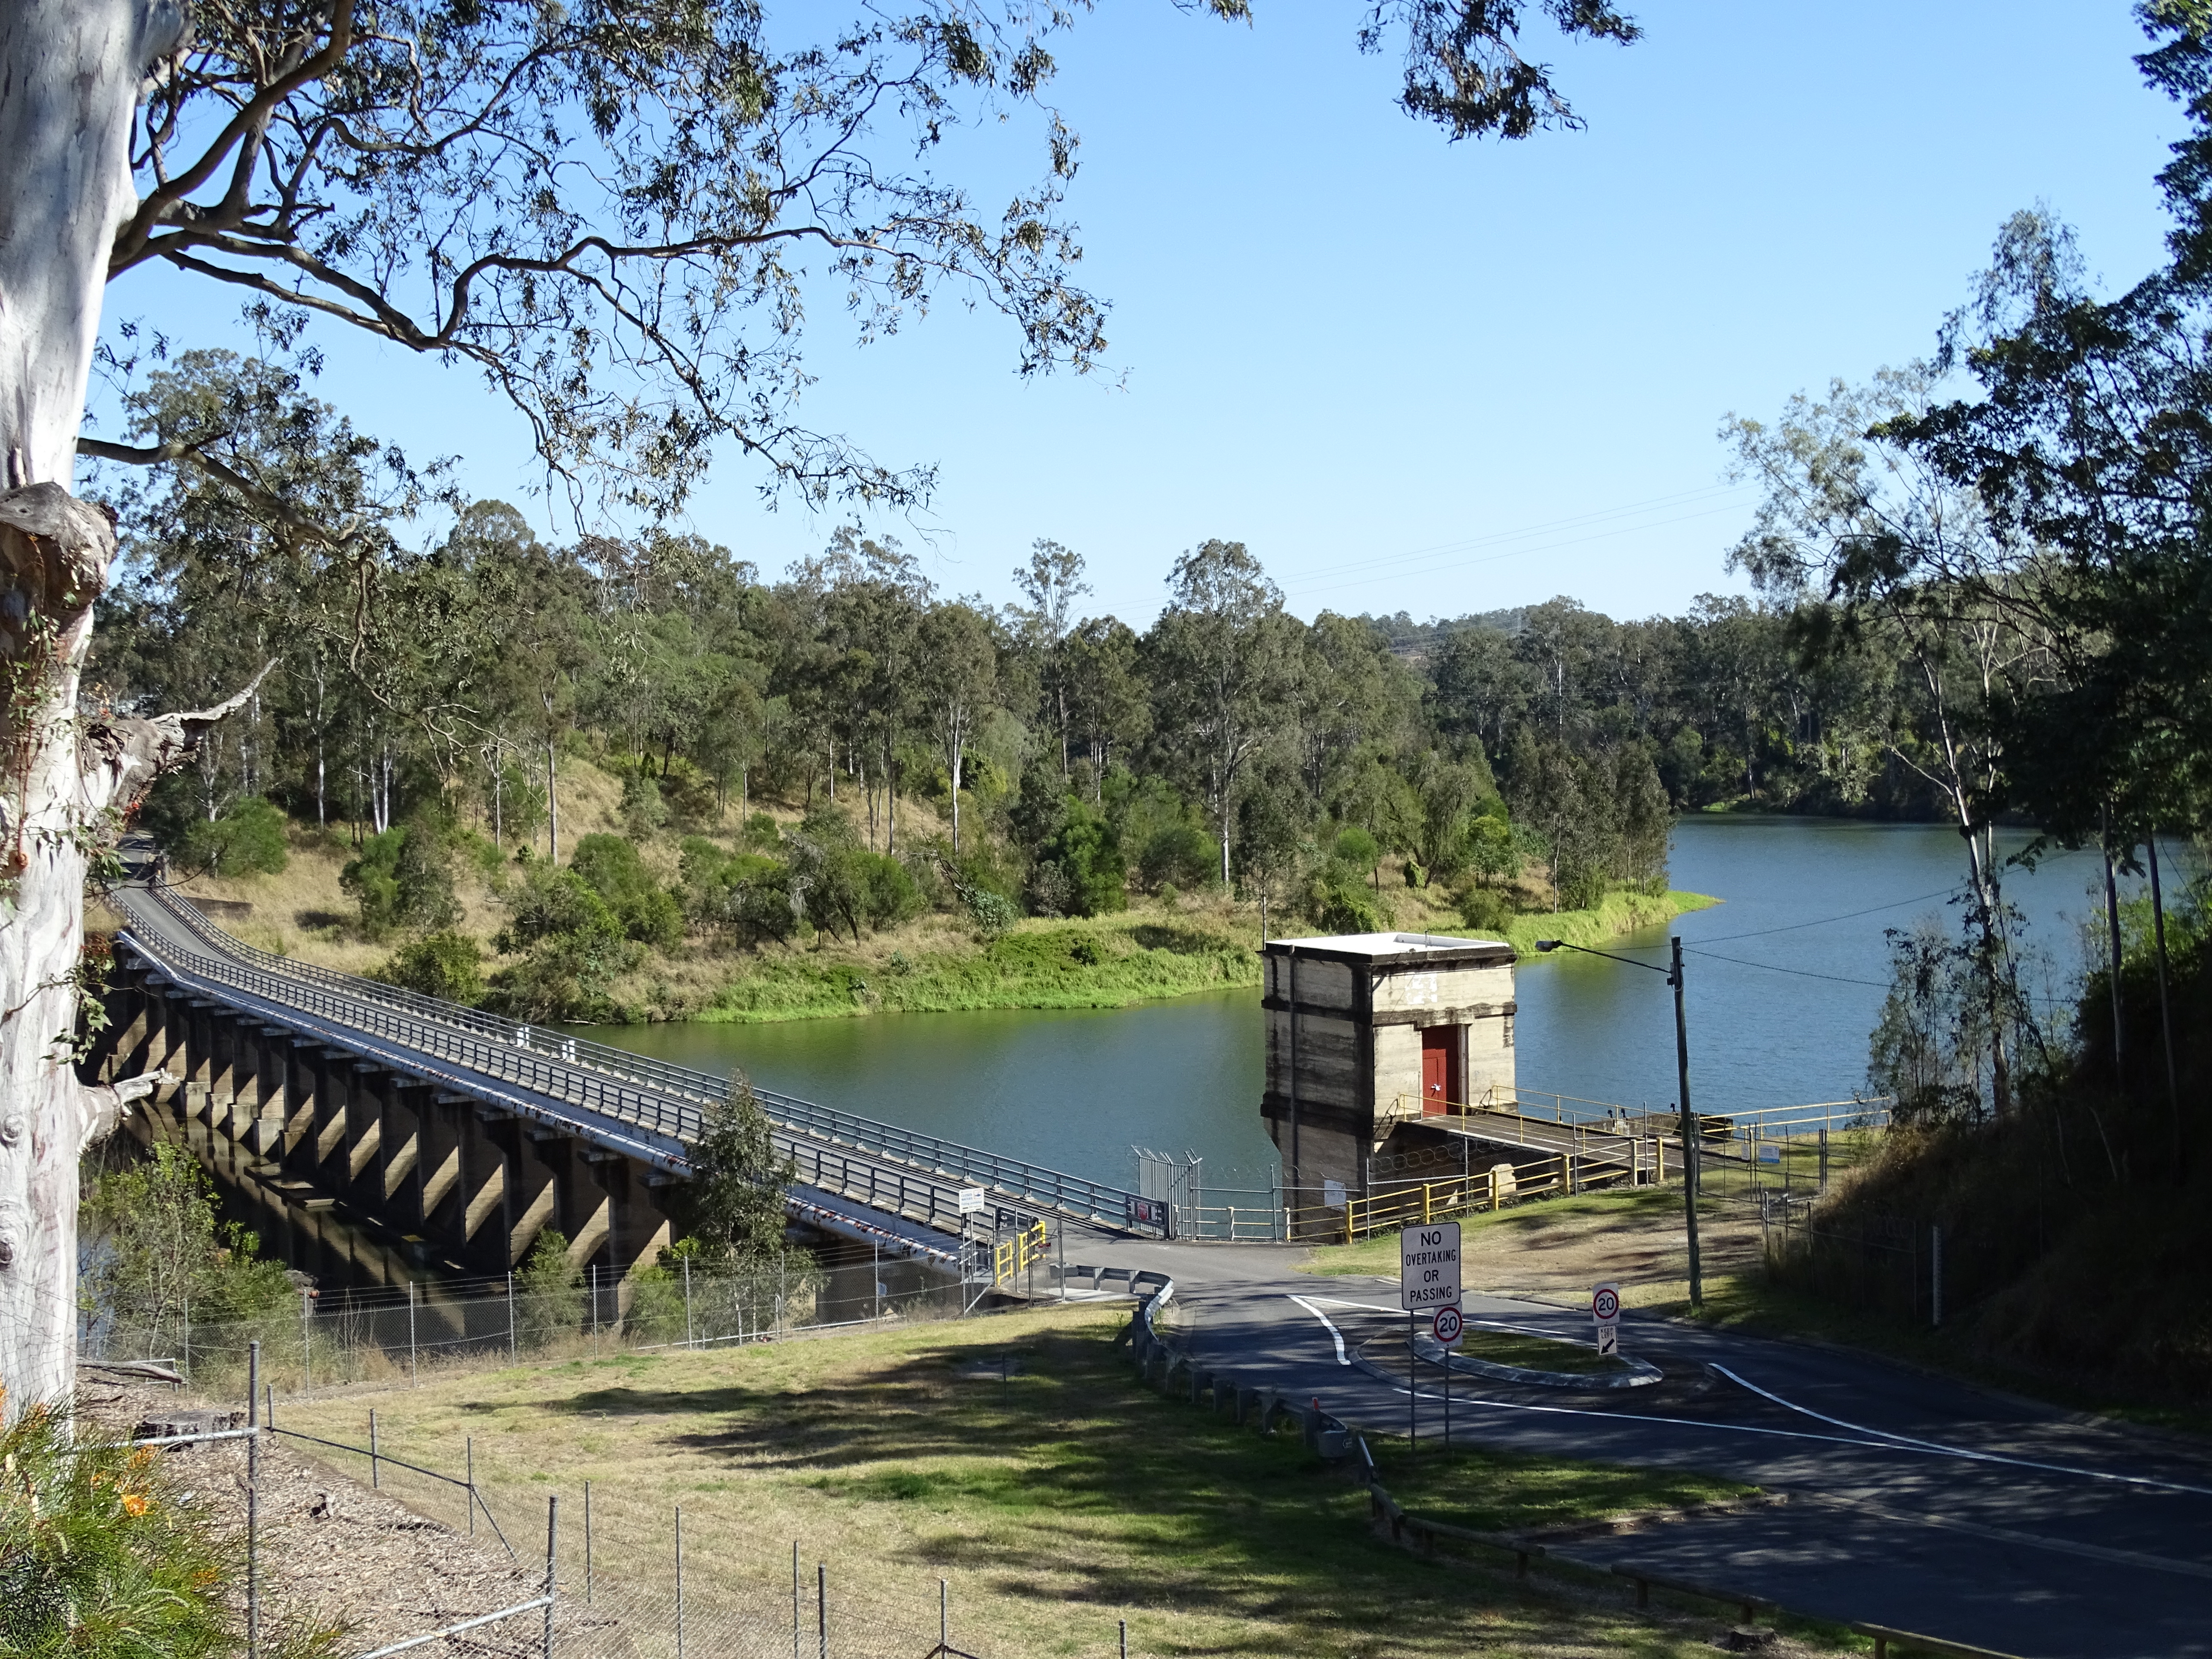 This is an image of the local heritage place known as Mt Crosby Weir & Old Bridge Foundations